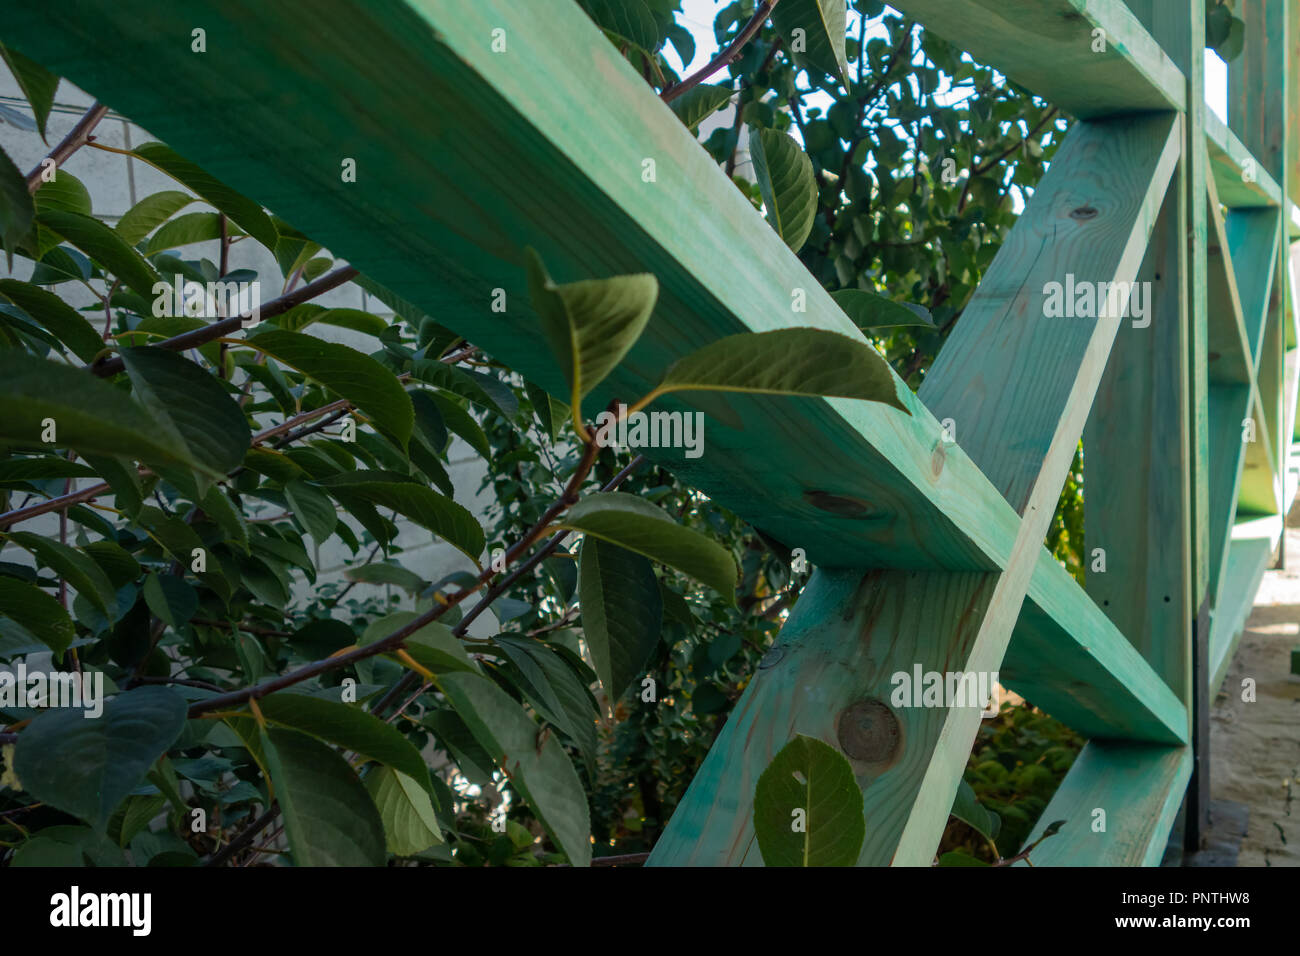 Stock Photo - wooden fence in the grass. Wooden fence of green boards. Stock Photo